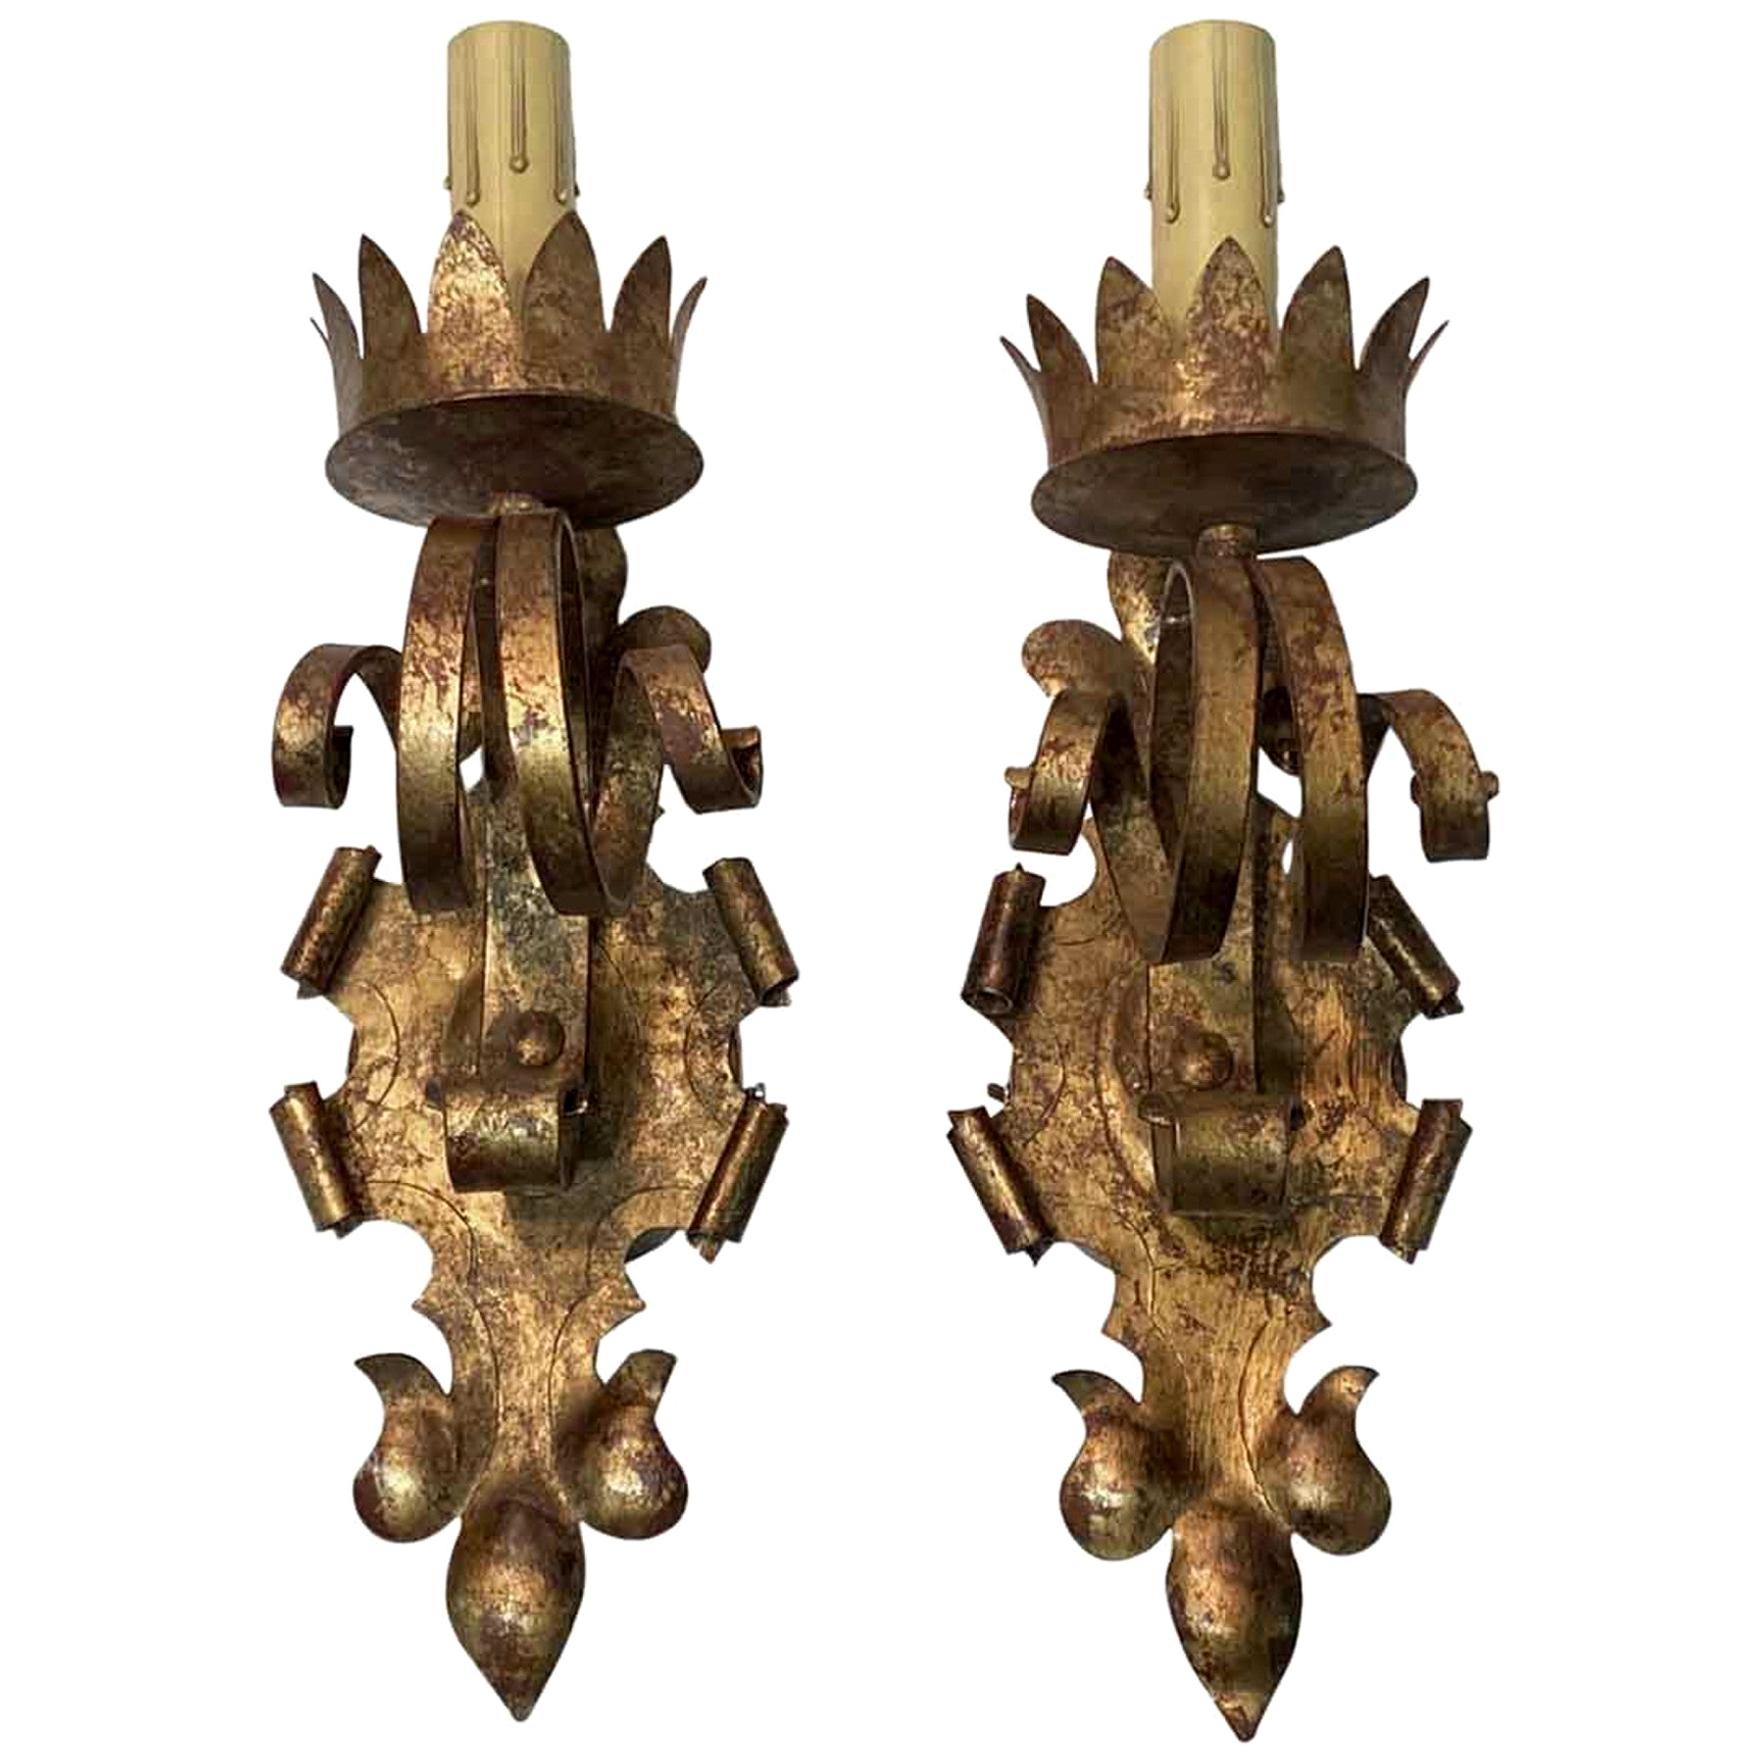 2000s Pair of Gothic Wall Sconces Gold Gilt Finish Over Wrought Iron